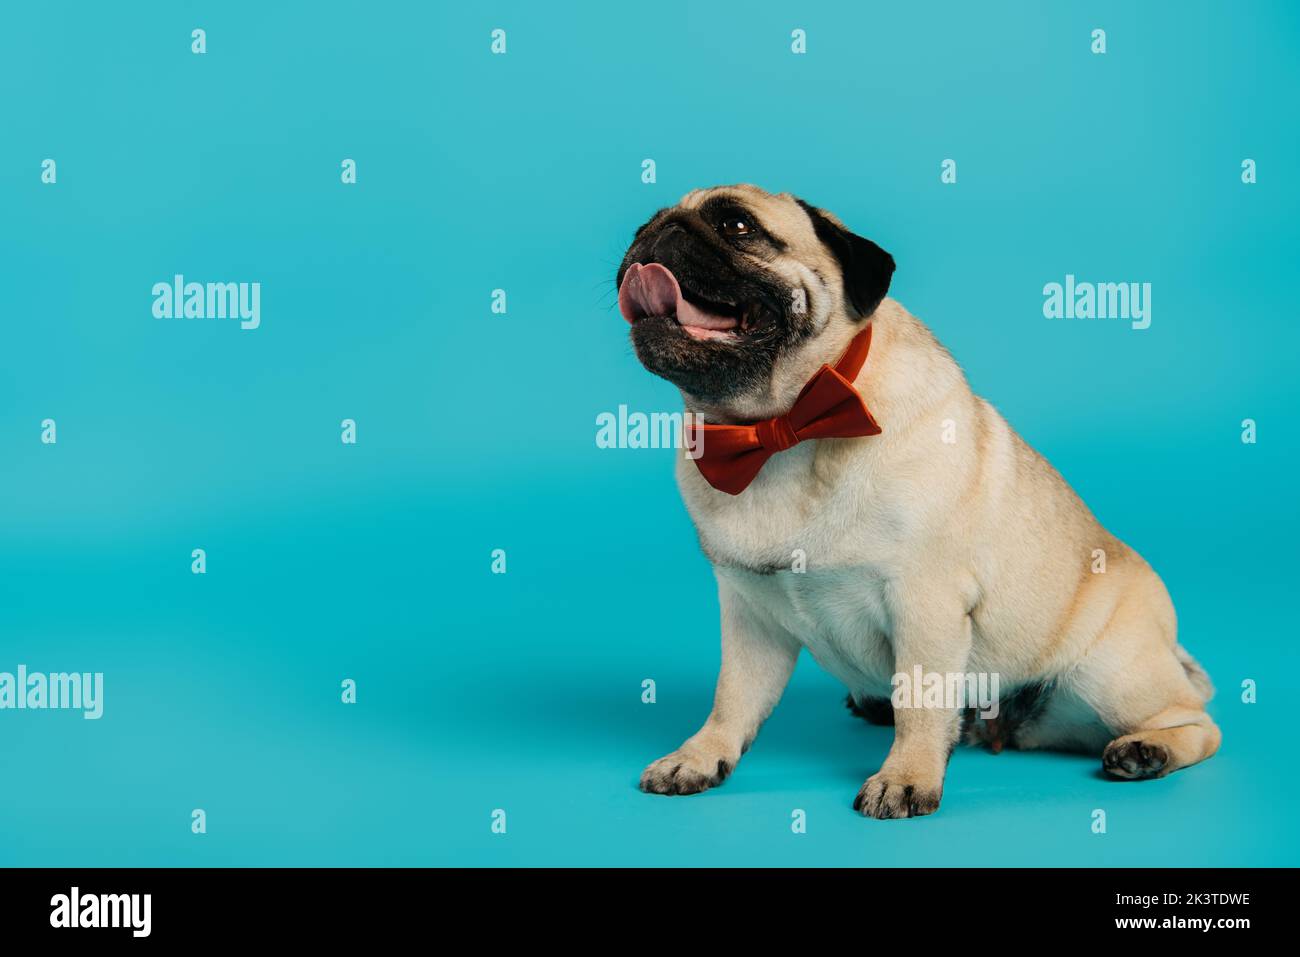 stylish pug dog in bow tie sitting and looking up on blue background,stock image Stock Photo